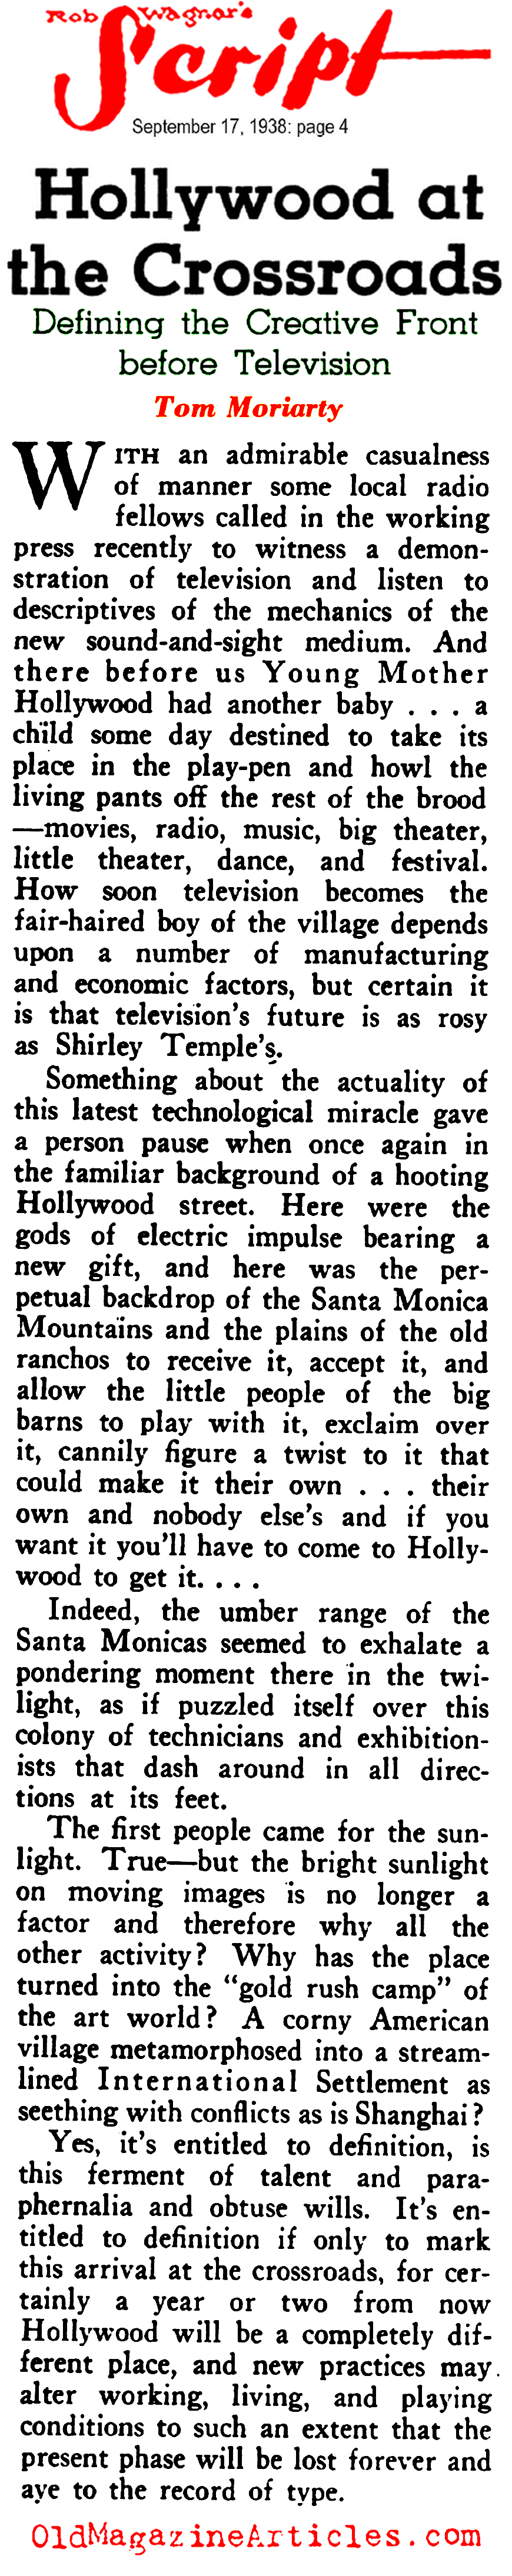 Television: God's Gift to Hollywood (Rob Wagner's Script, 1938)